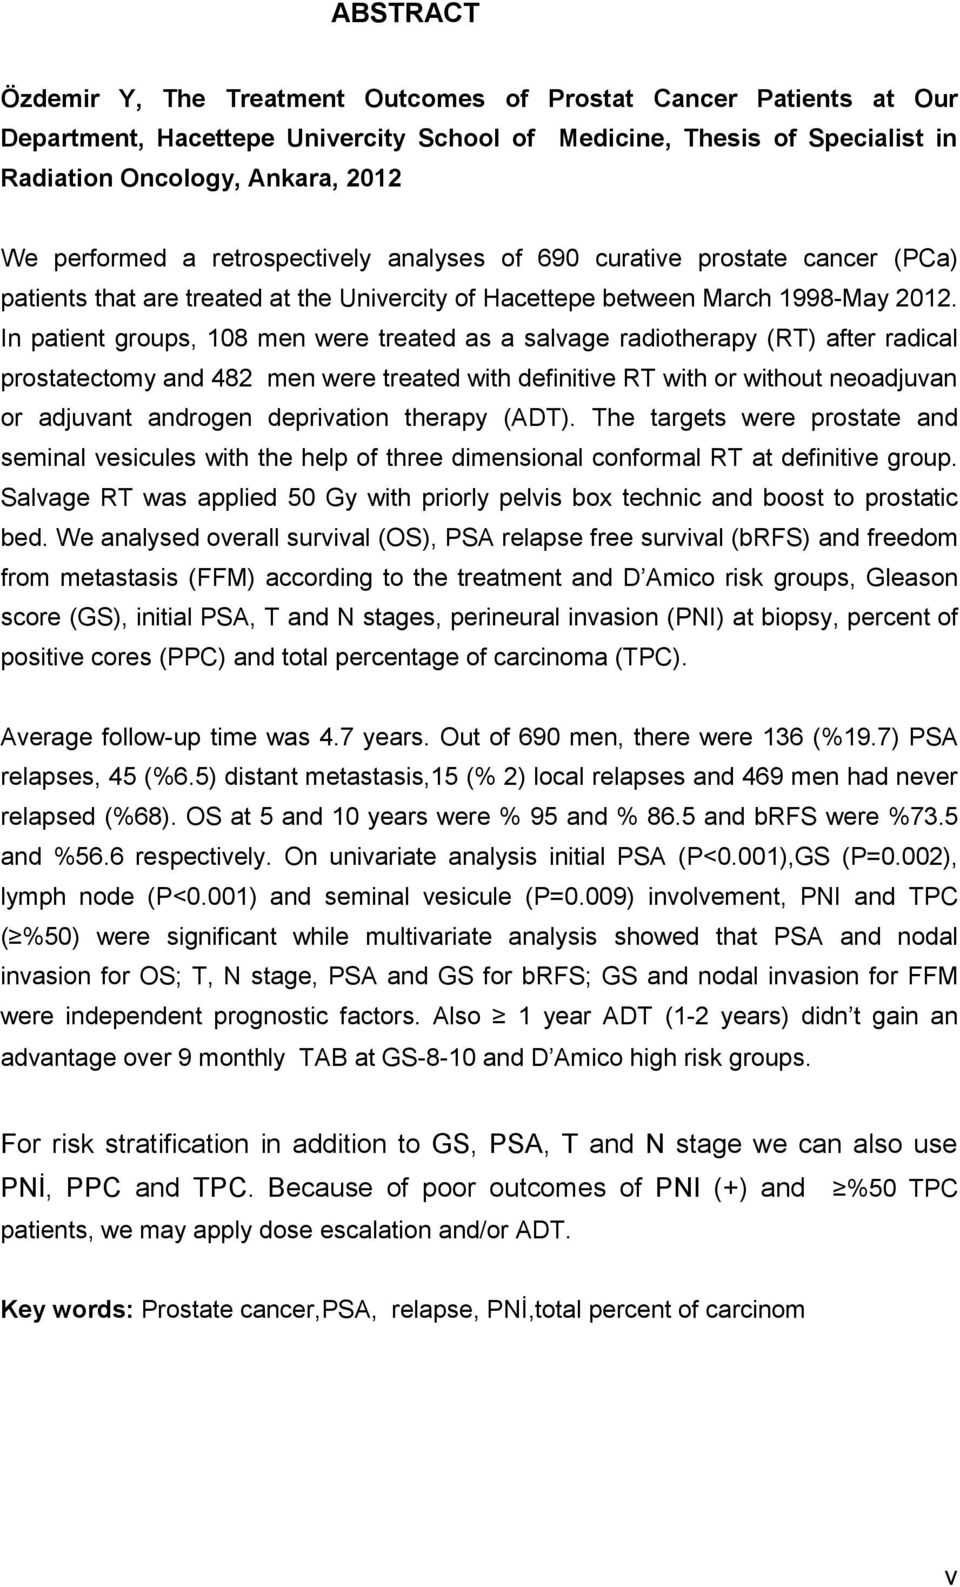 In patient groups, 108 men were treated as a salvage radiotherapy (RT) after radical prostatectomy and 482 men were treated with definitive RT with or without neoadjuvan or adjuvant androgen